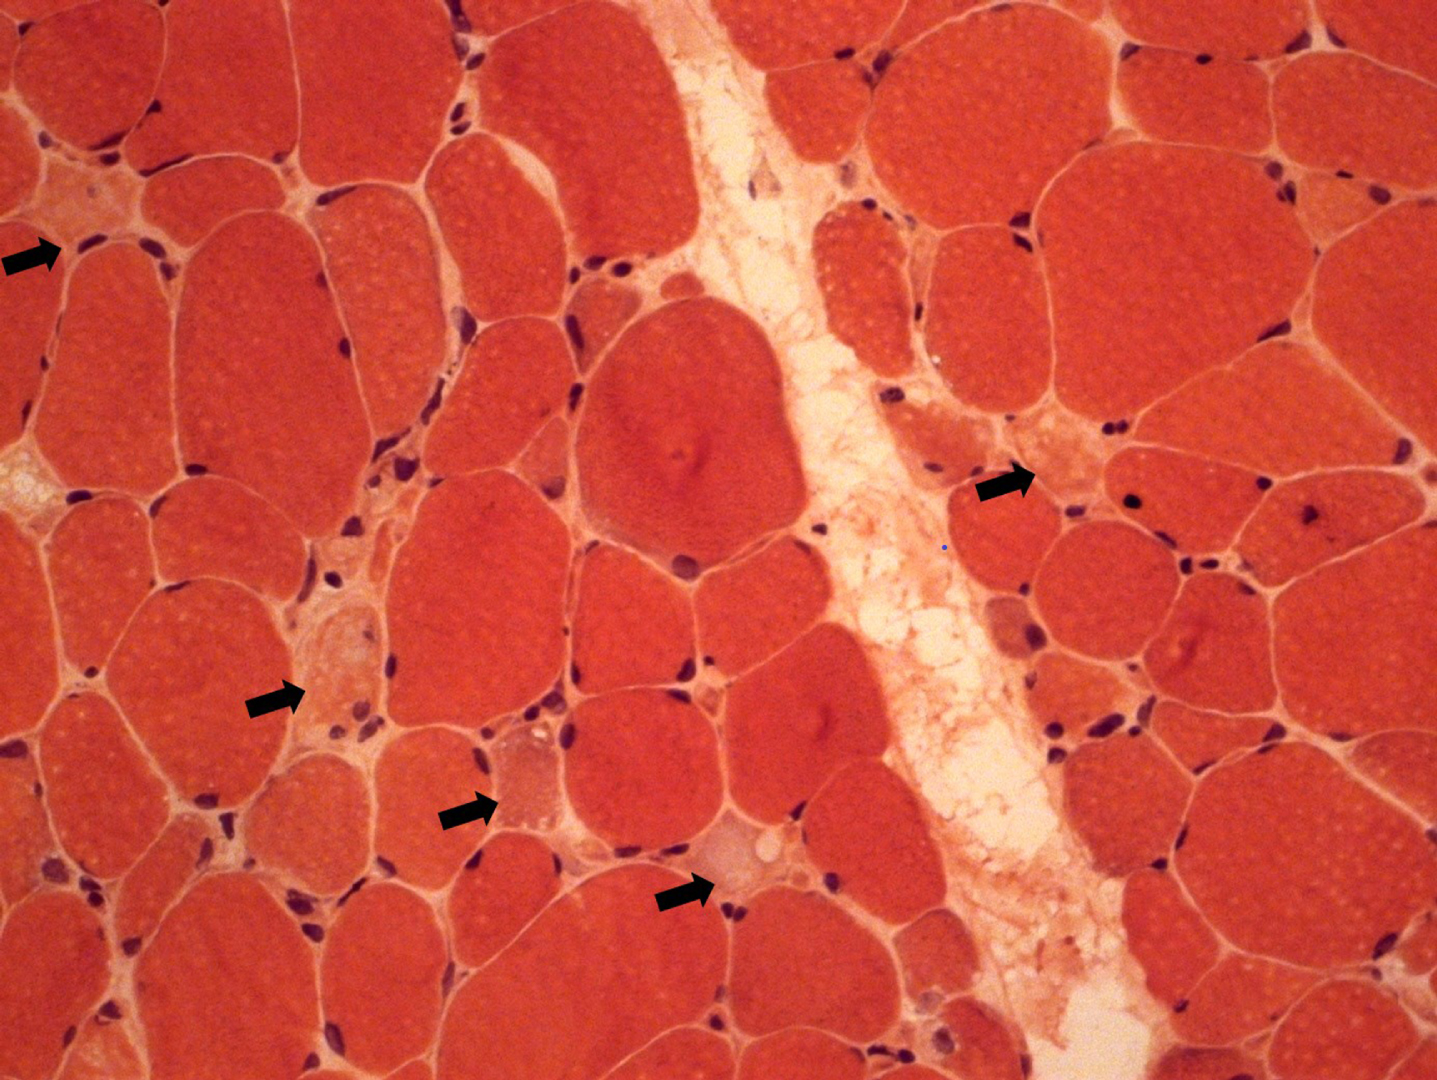 Muscle biopsy showing mild variation in fiber size and scattered necrotic fibers (black arrow).